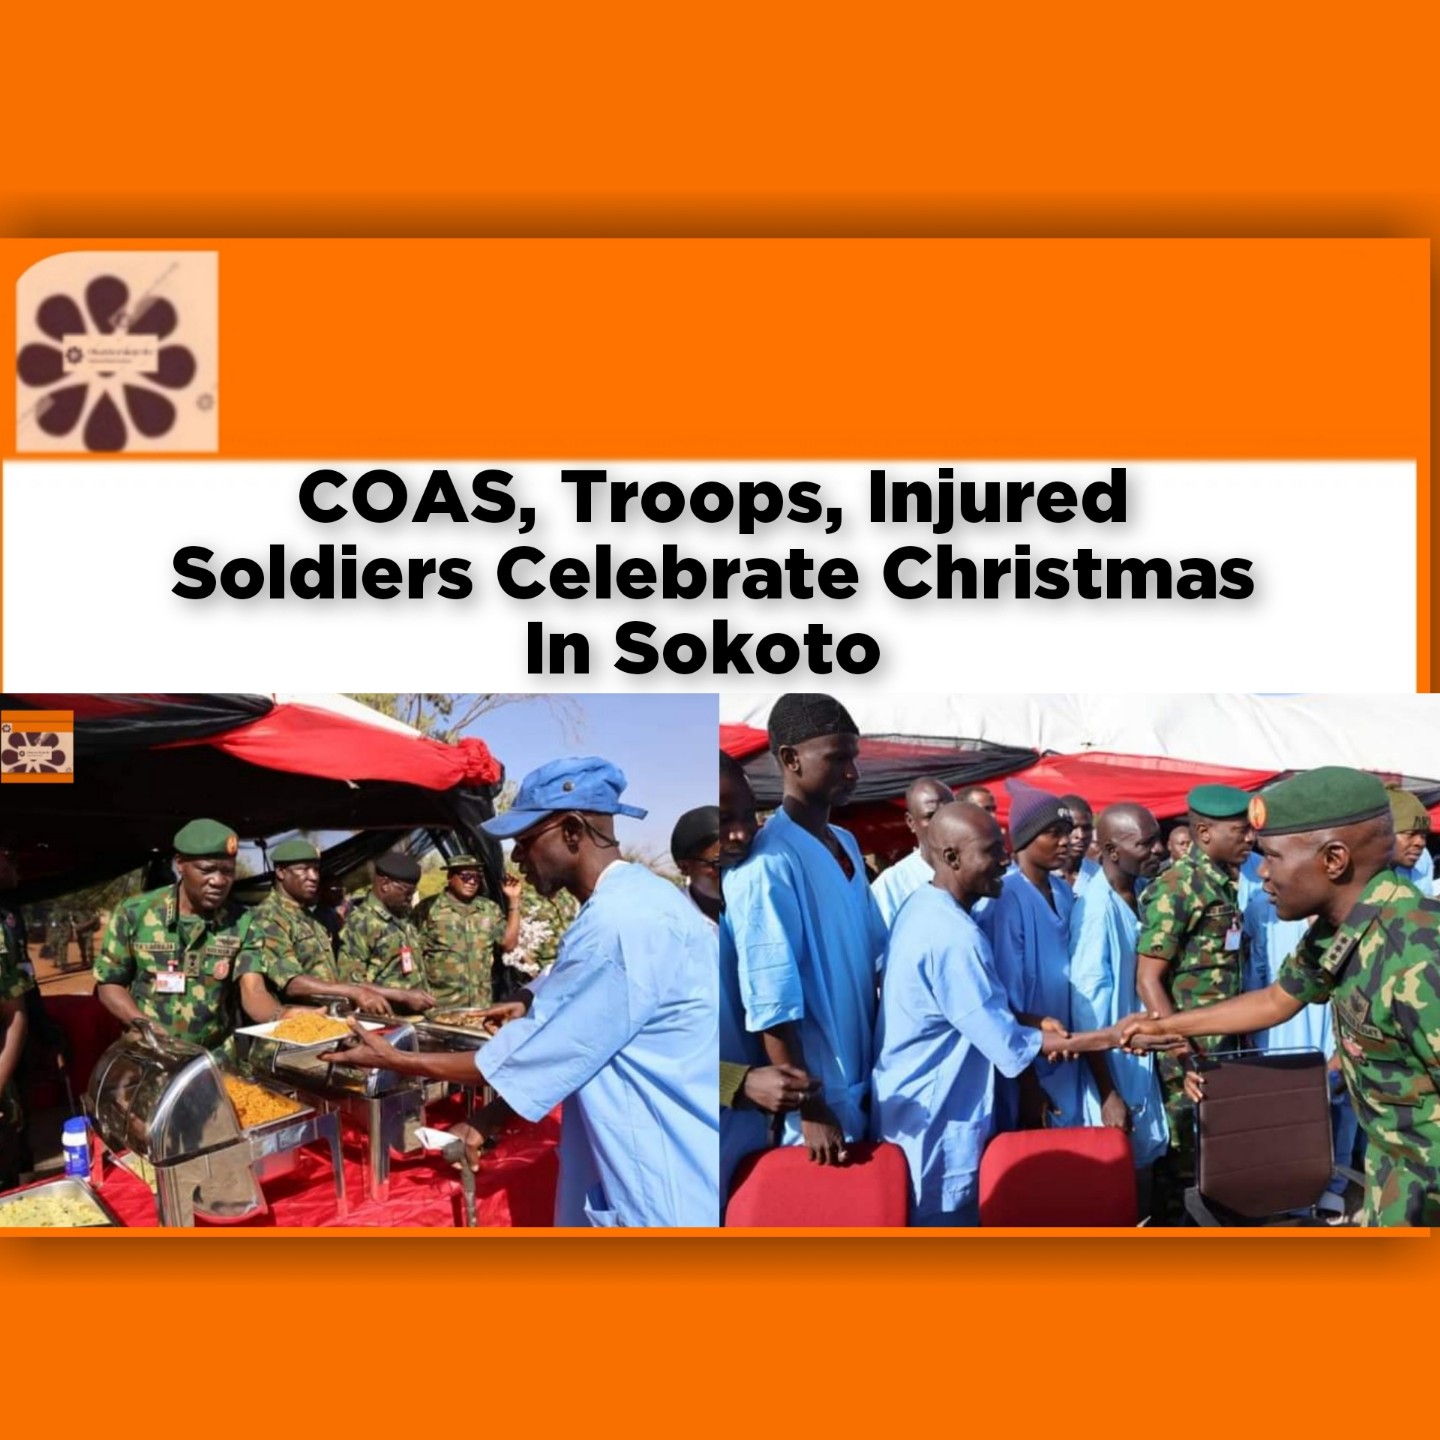 COAS, Troops, Injured Soldiers Celebrate Christmas In Sokoto